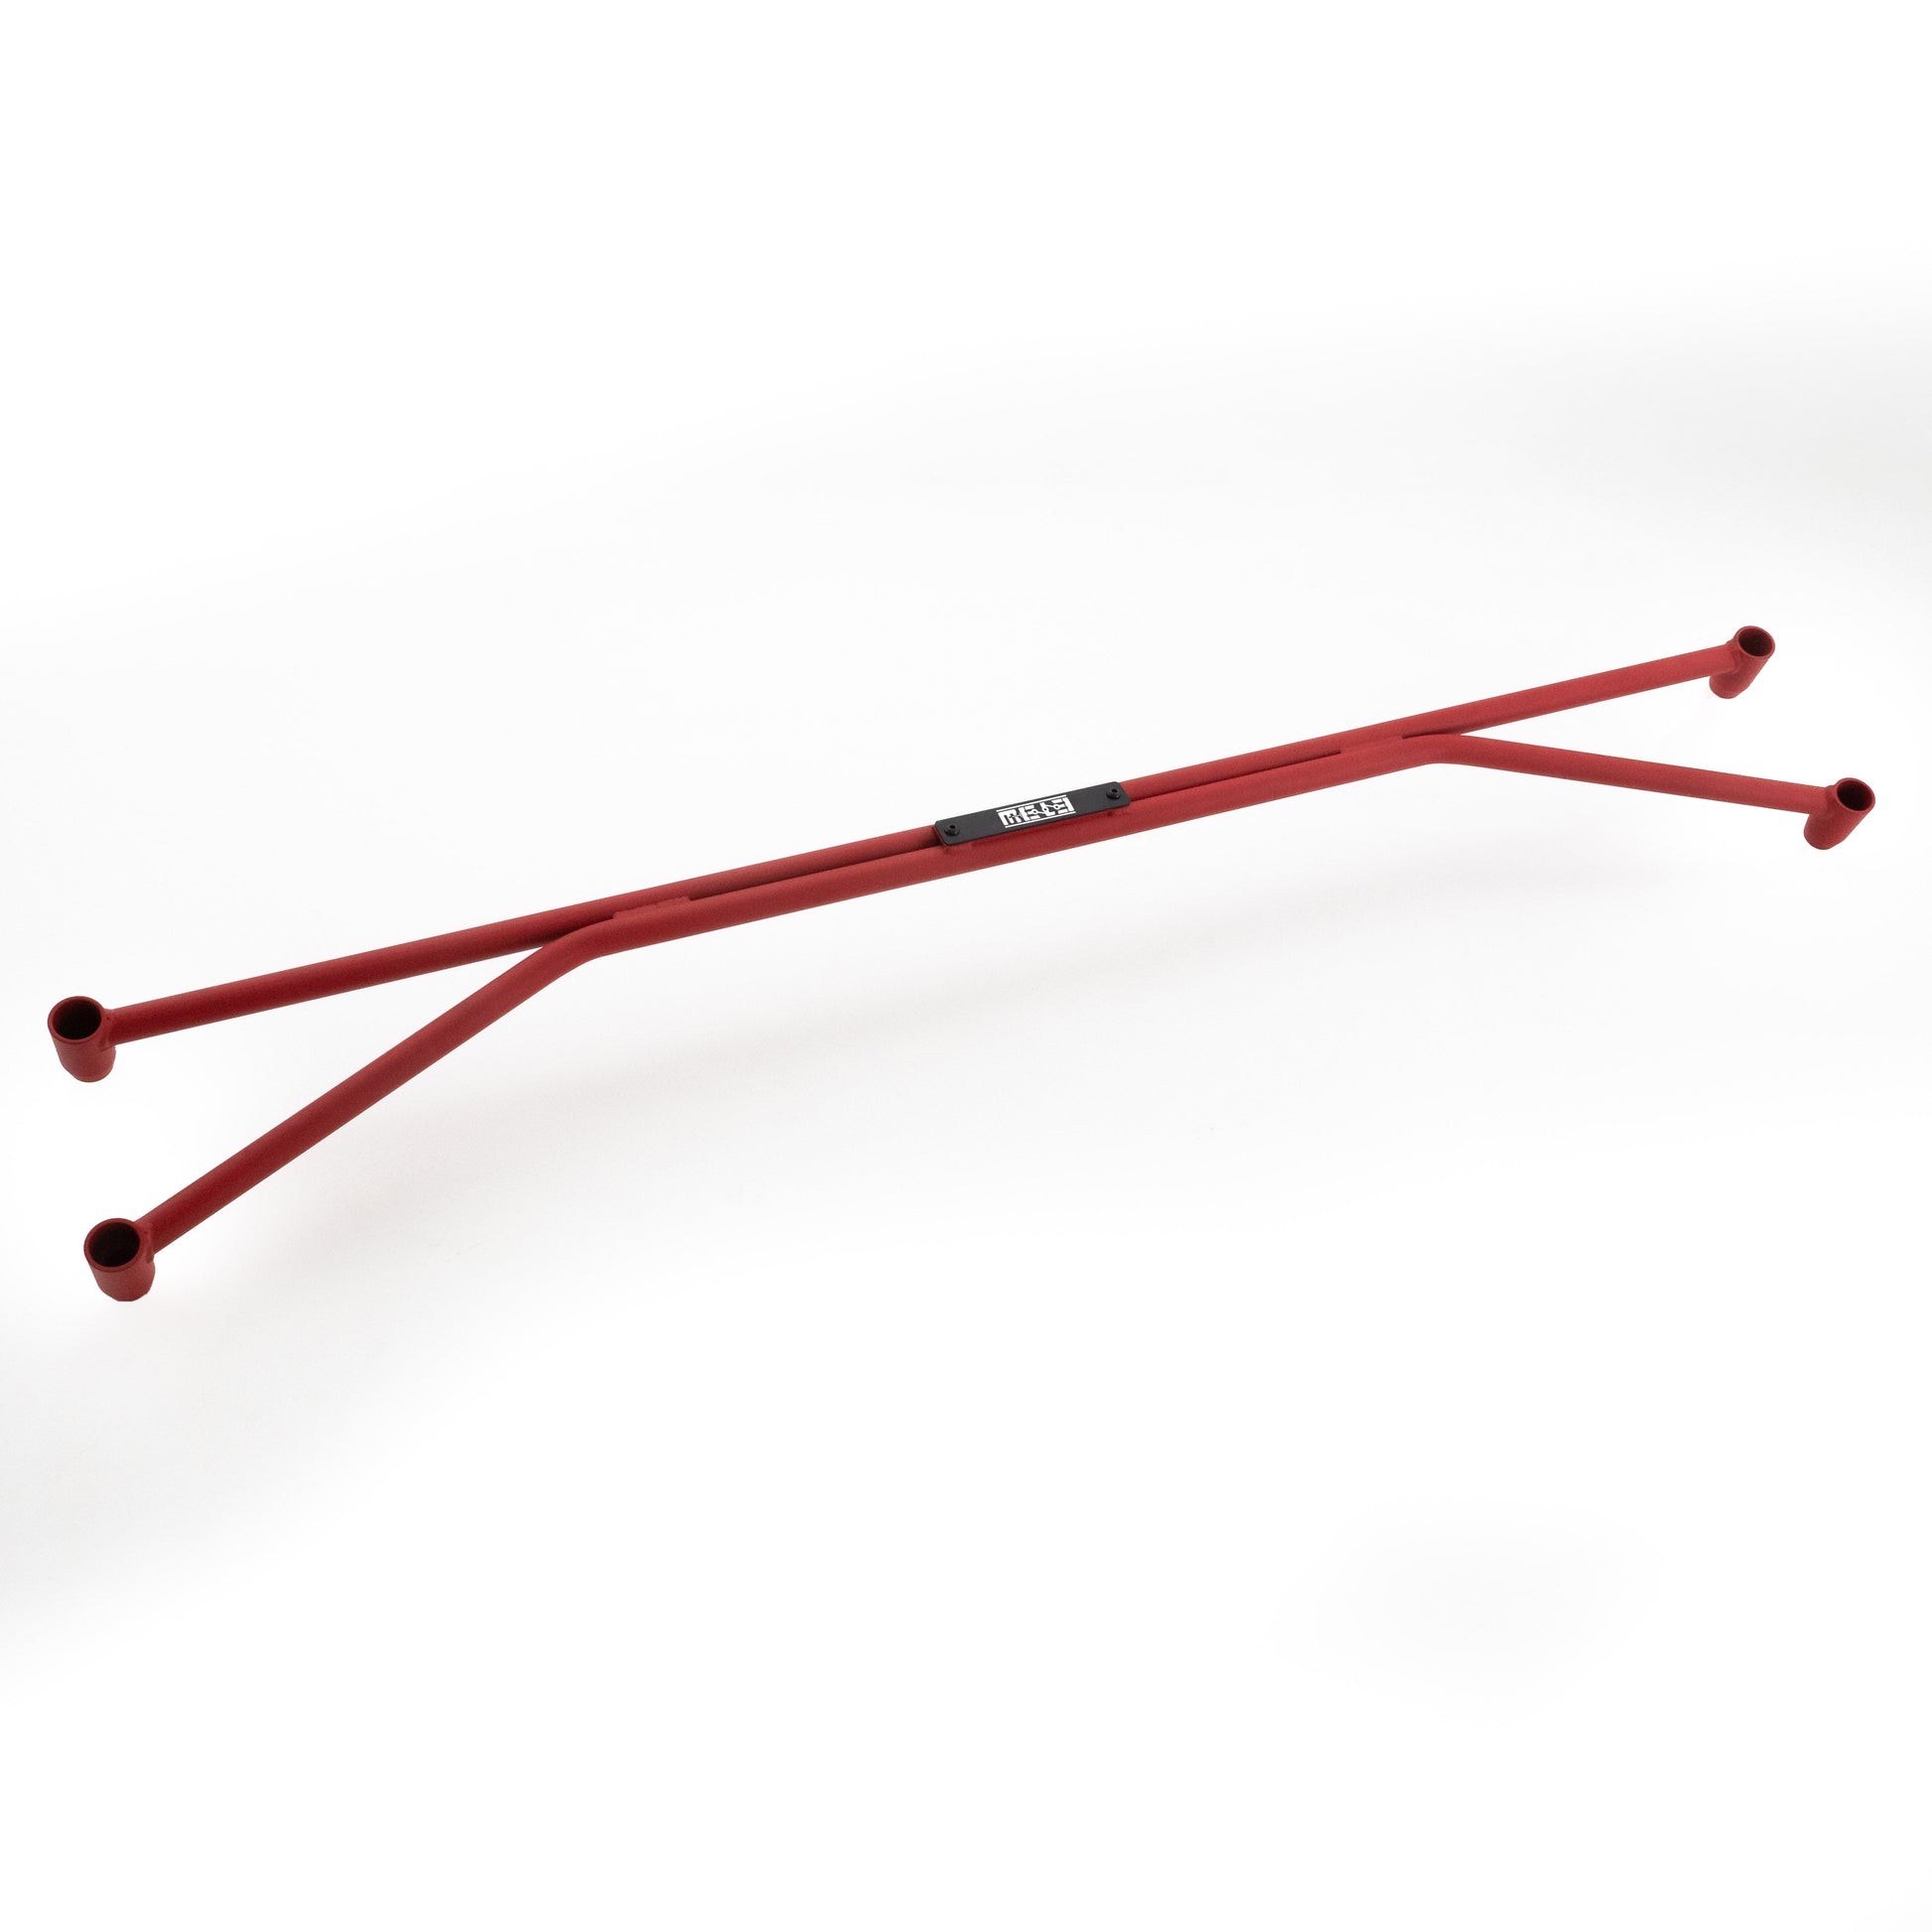 MeLe Subaru front strut tower bar in red